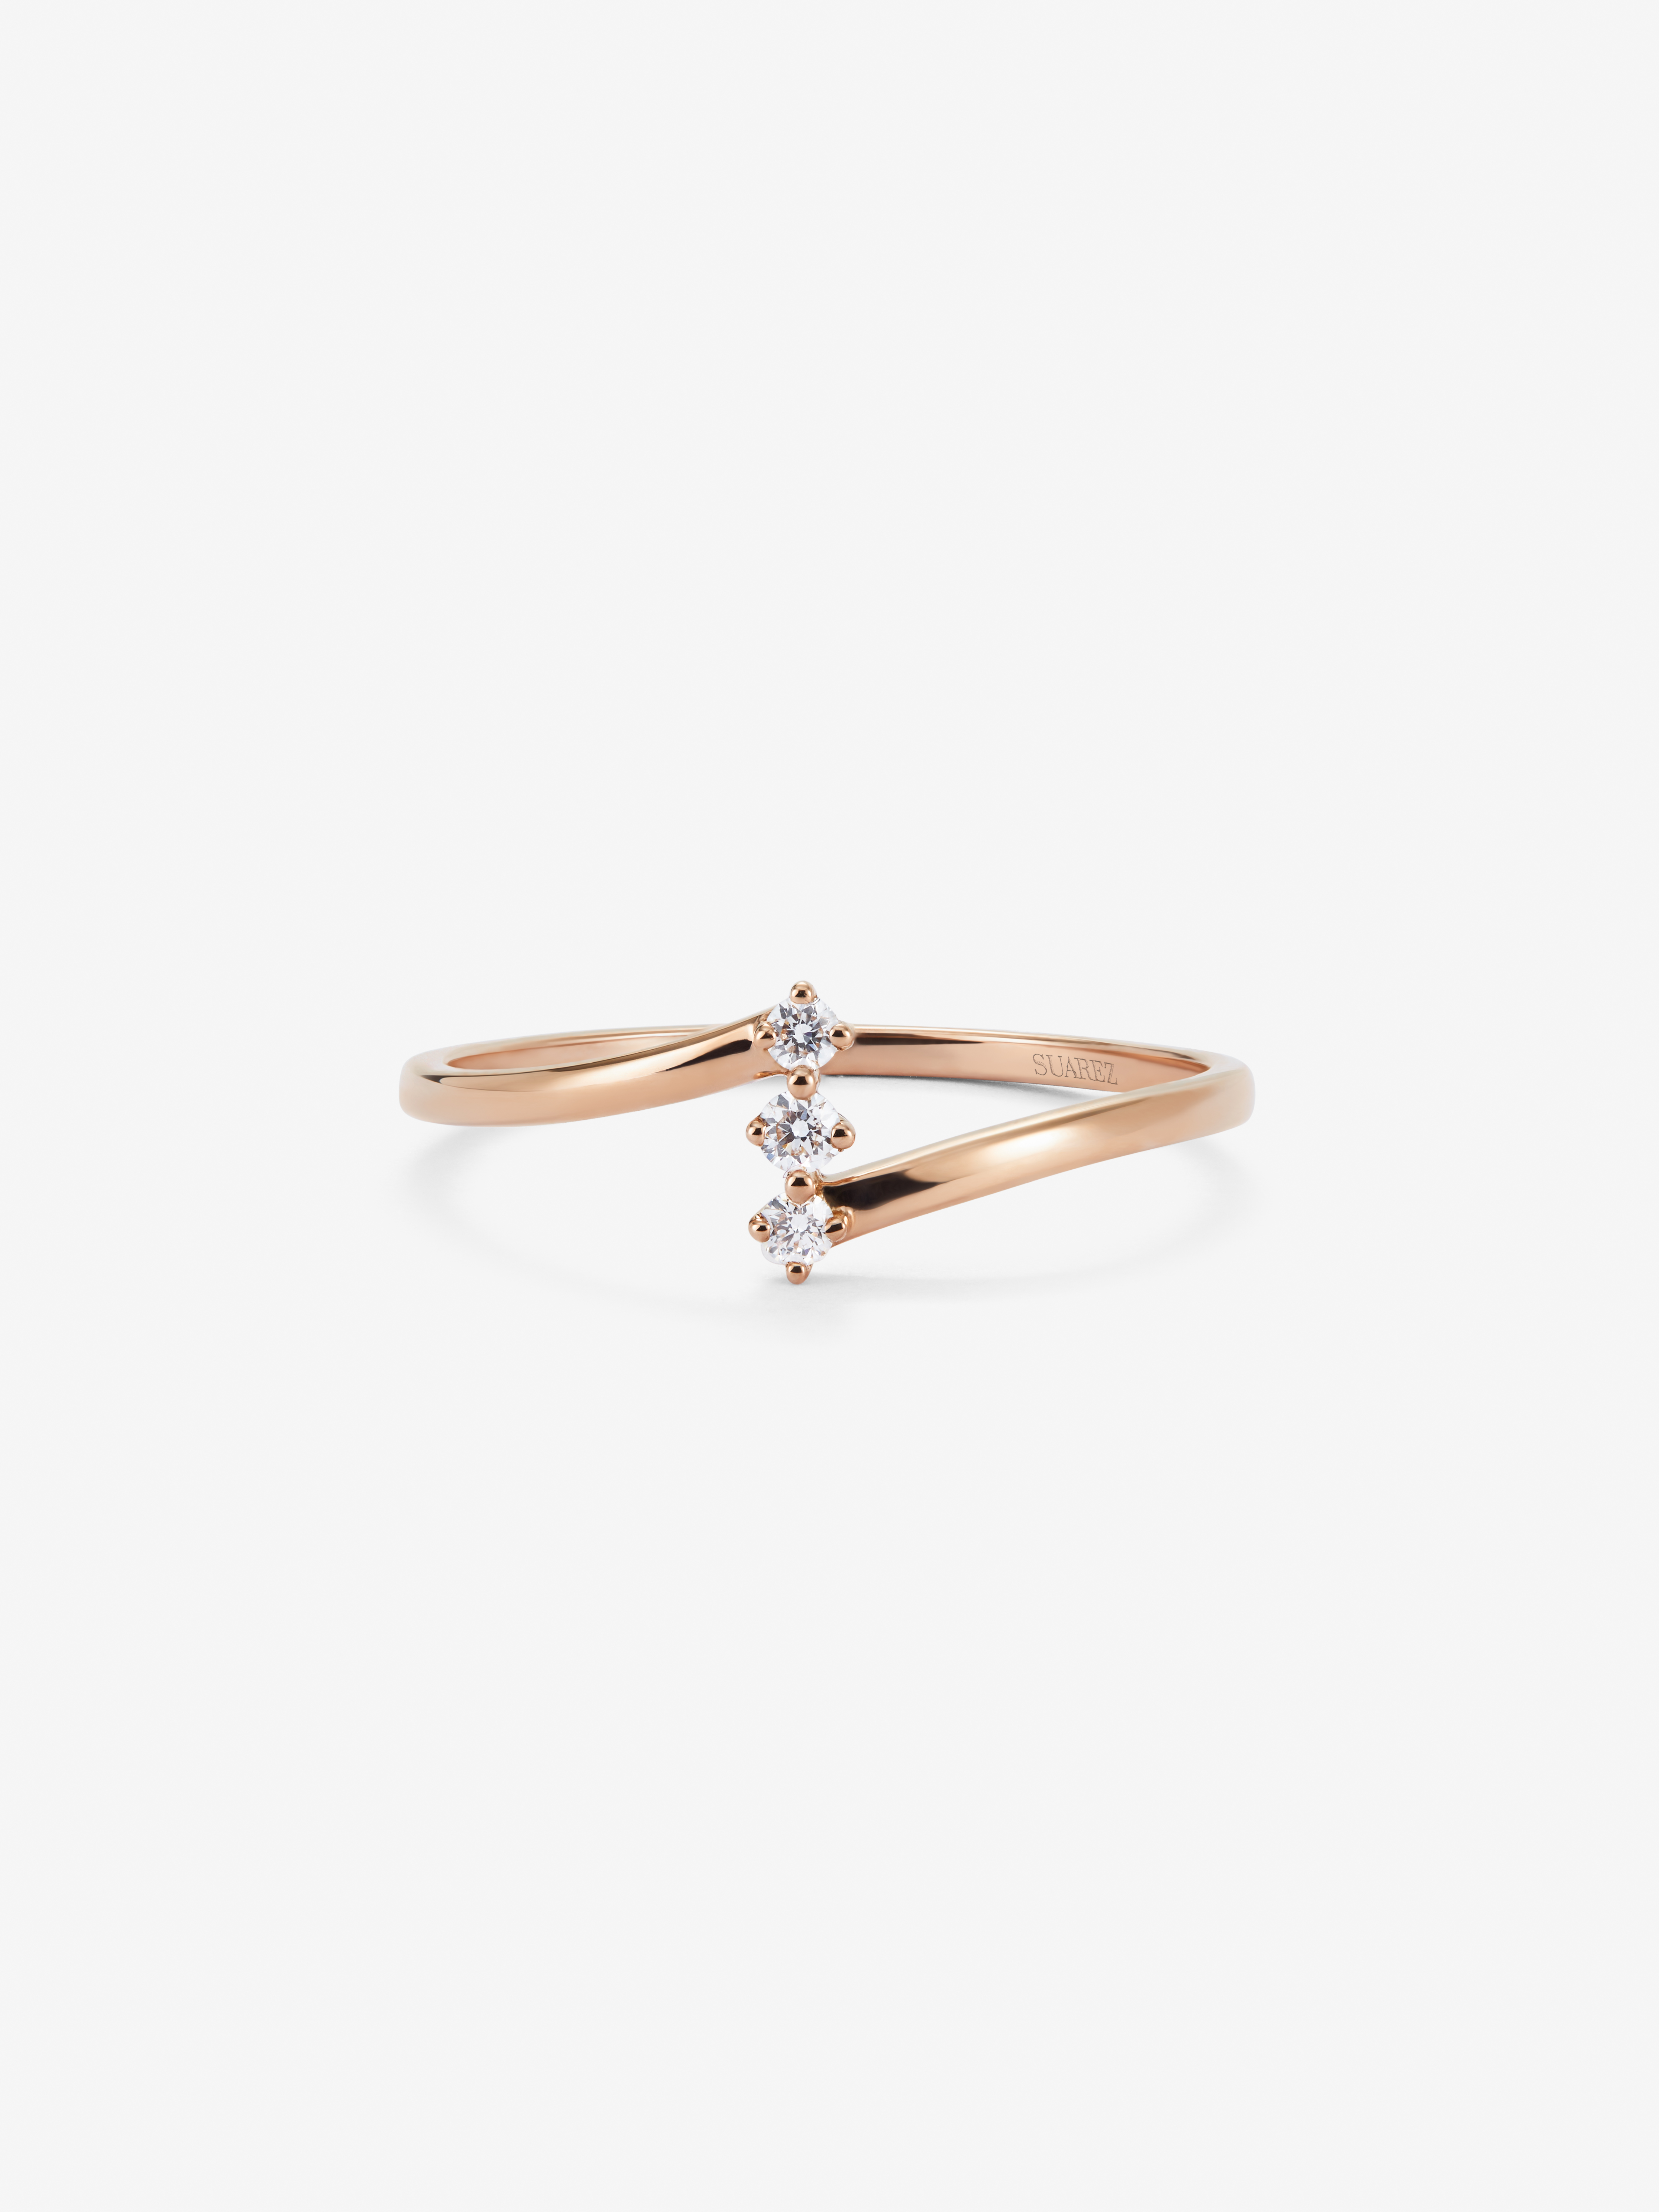 18K rose gold ring with 0.06 cts bright size diamonds